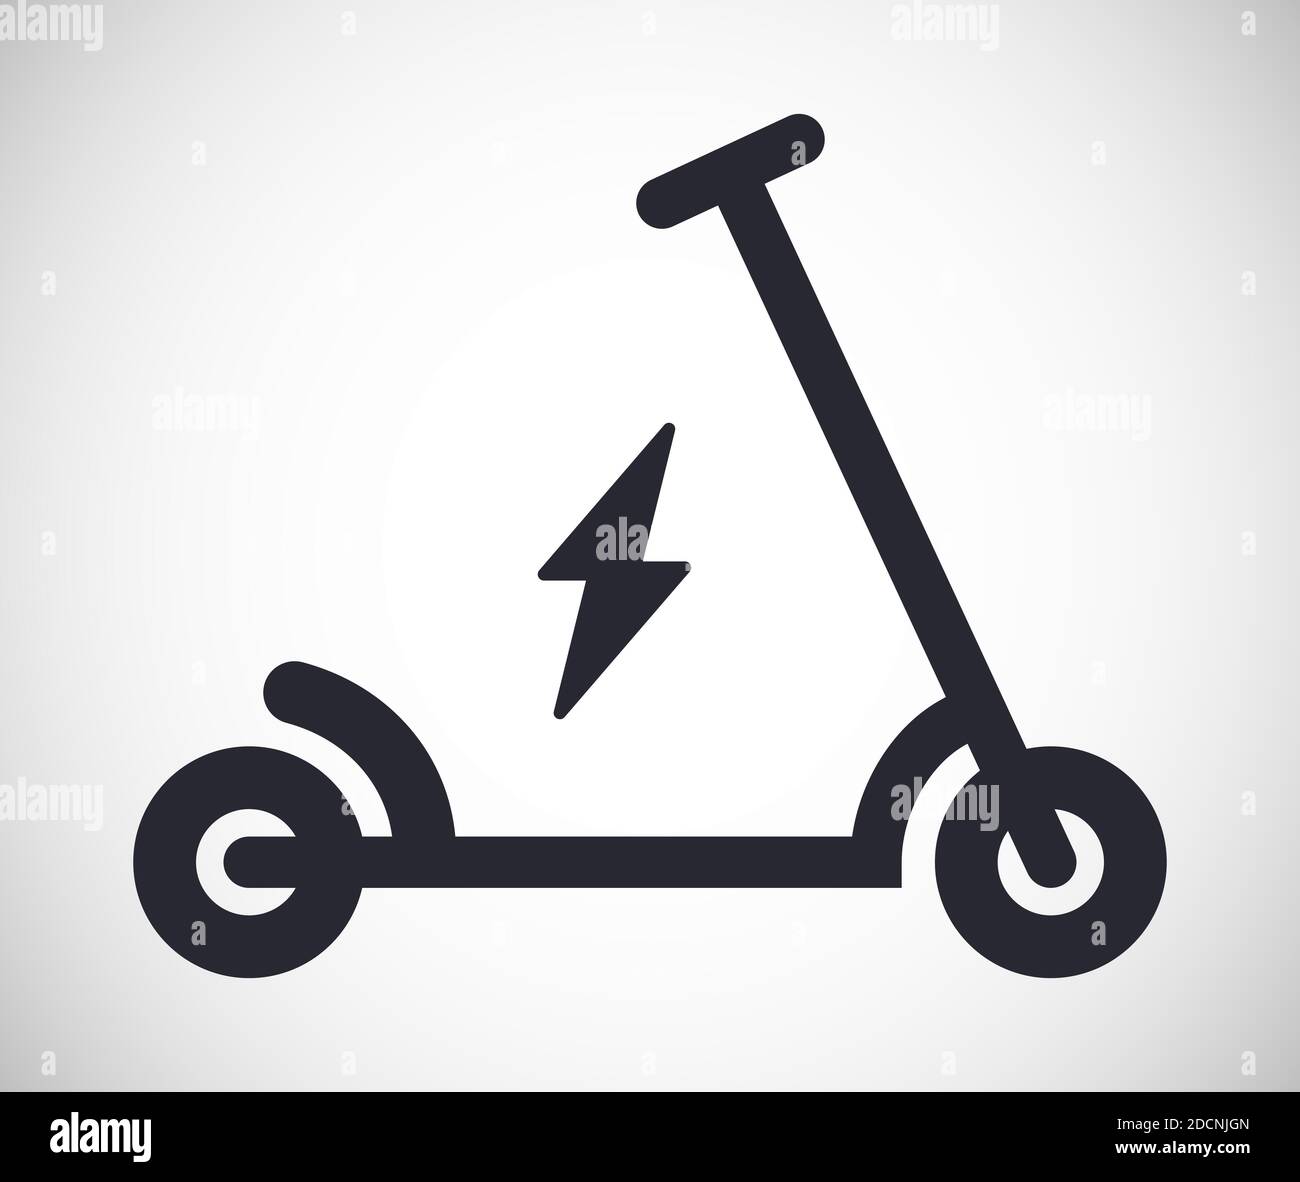 Electric scooter symbol grey vector illustration icon Stock Vector